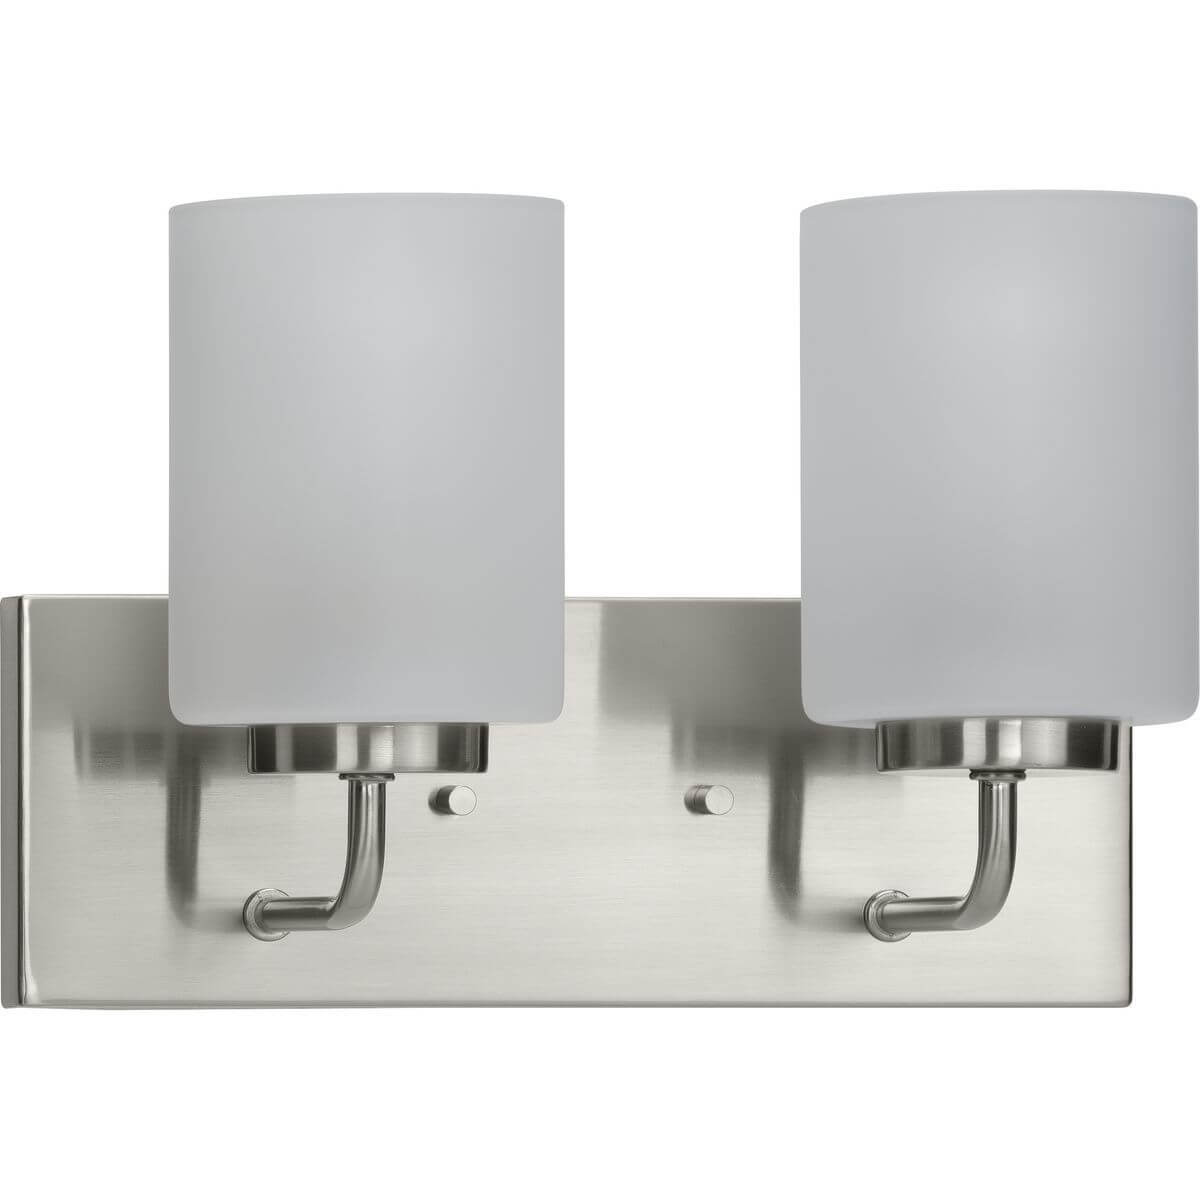 Progress Lighting Merry 2 Light 12 inch Bath Vanity Light in Brushed Nickel with Etched Glass P300328-009